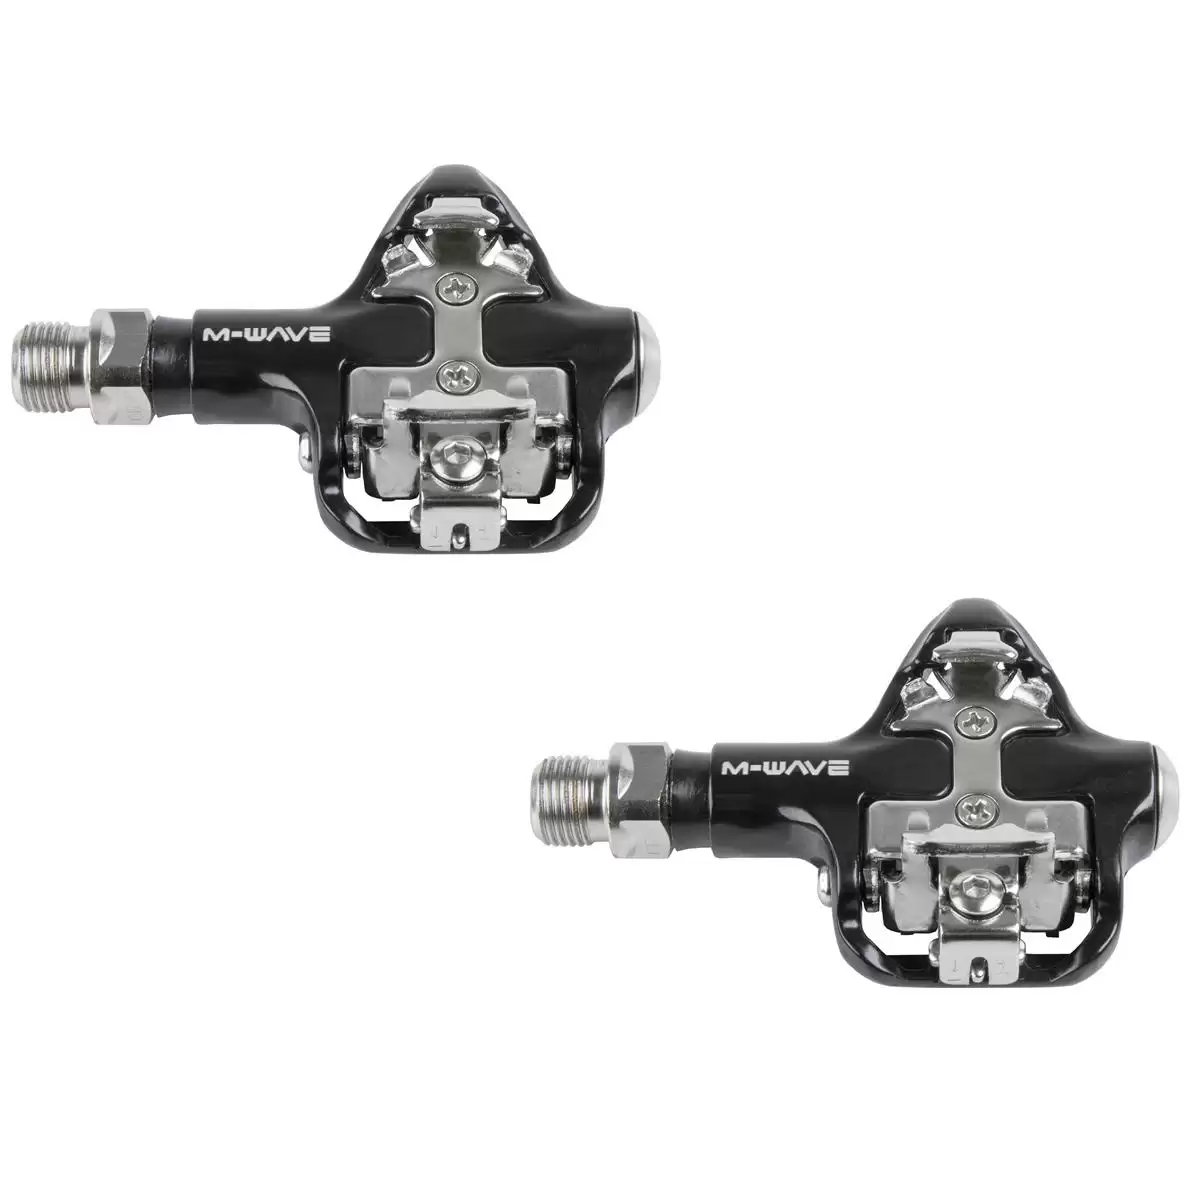 Pair of Drag-R2 pedals SPD 285gr - image